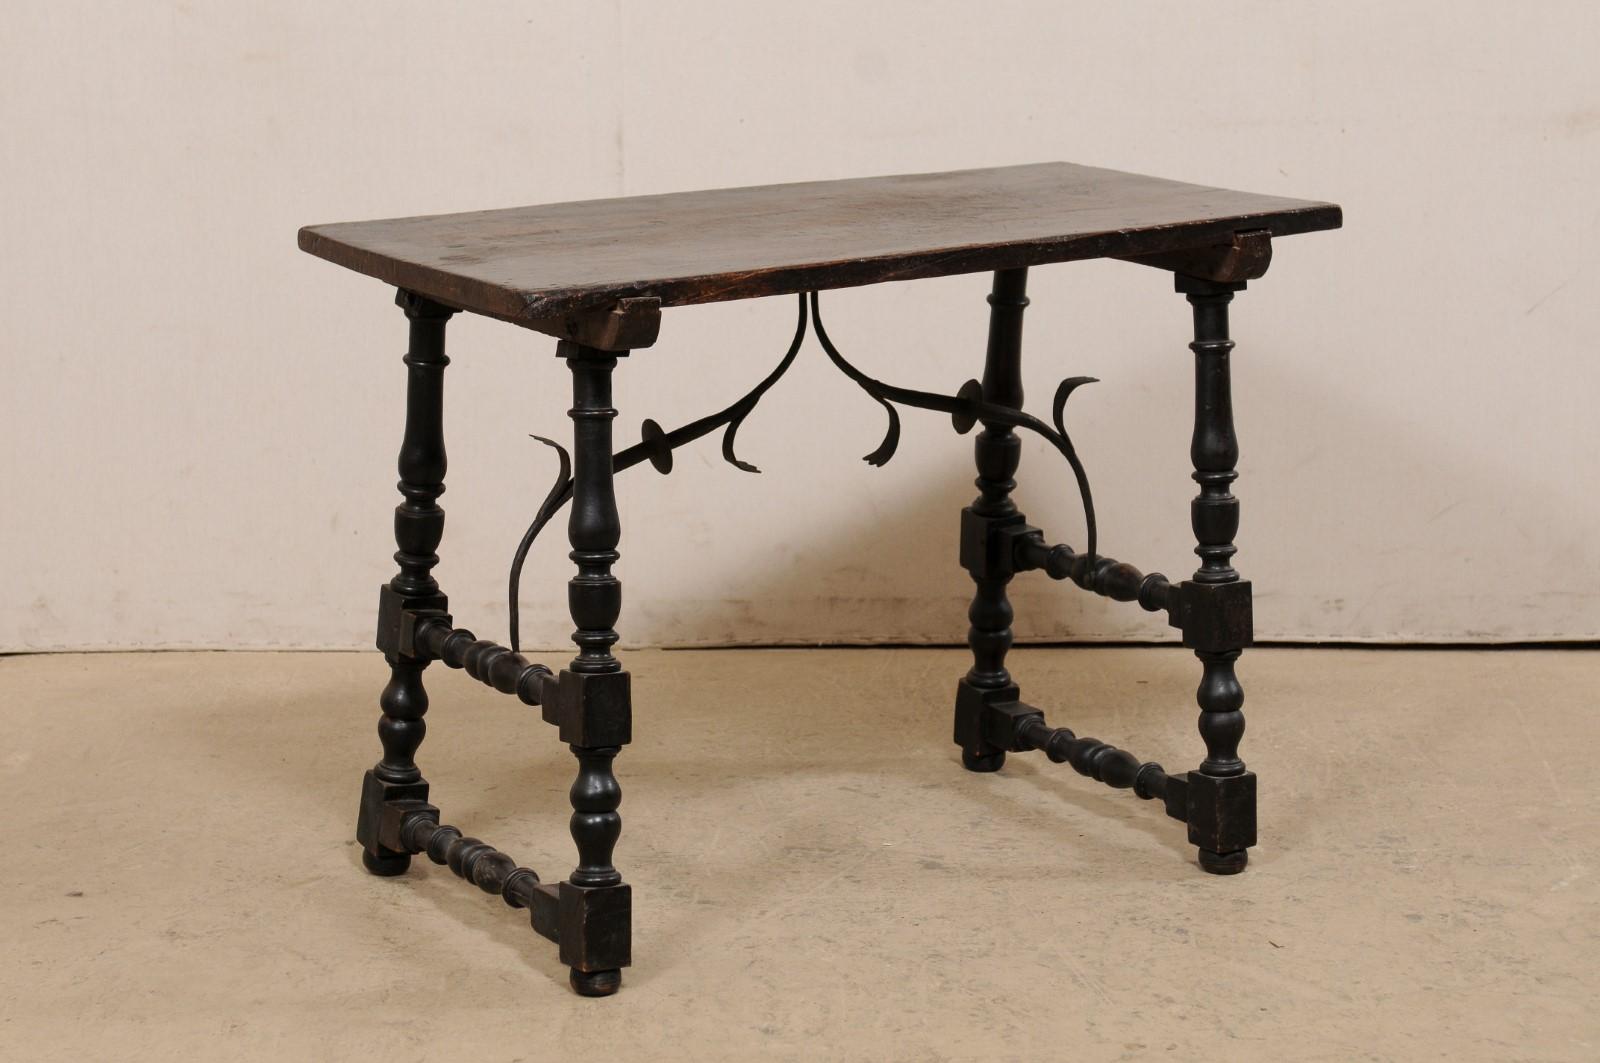 An Italian wood trestle-leg table, with decorative forged-iron stretcher, from the 18th century. This antique table from Italy features a rectangular-shaped top, which is raised upon a pair of nicely-turned, trestle-styled legs (with a pair of